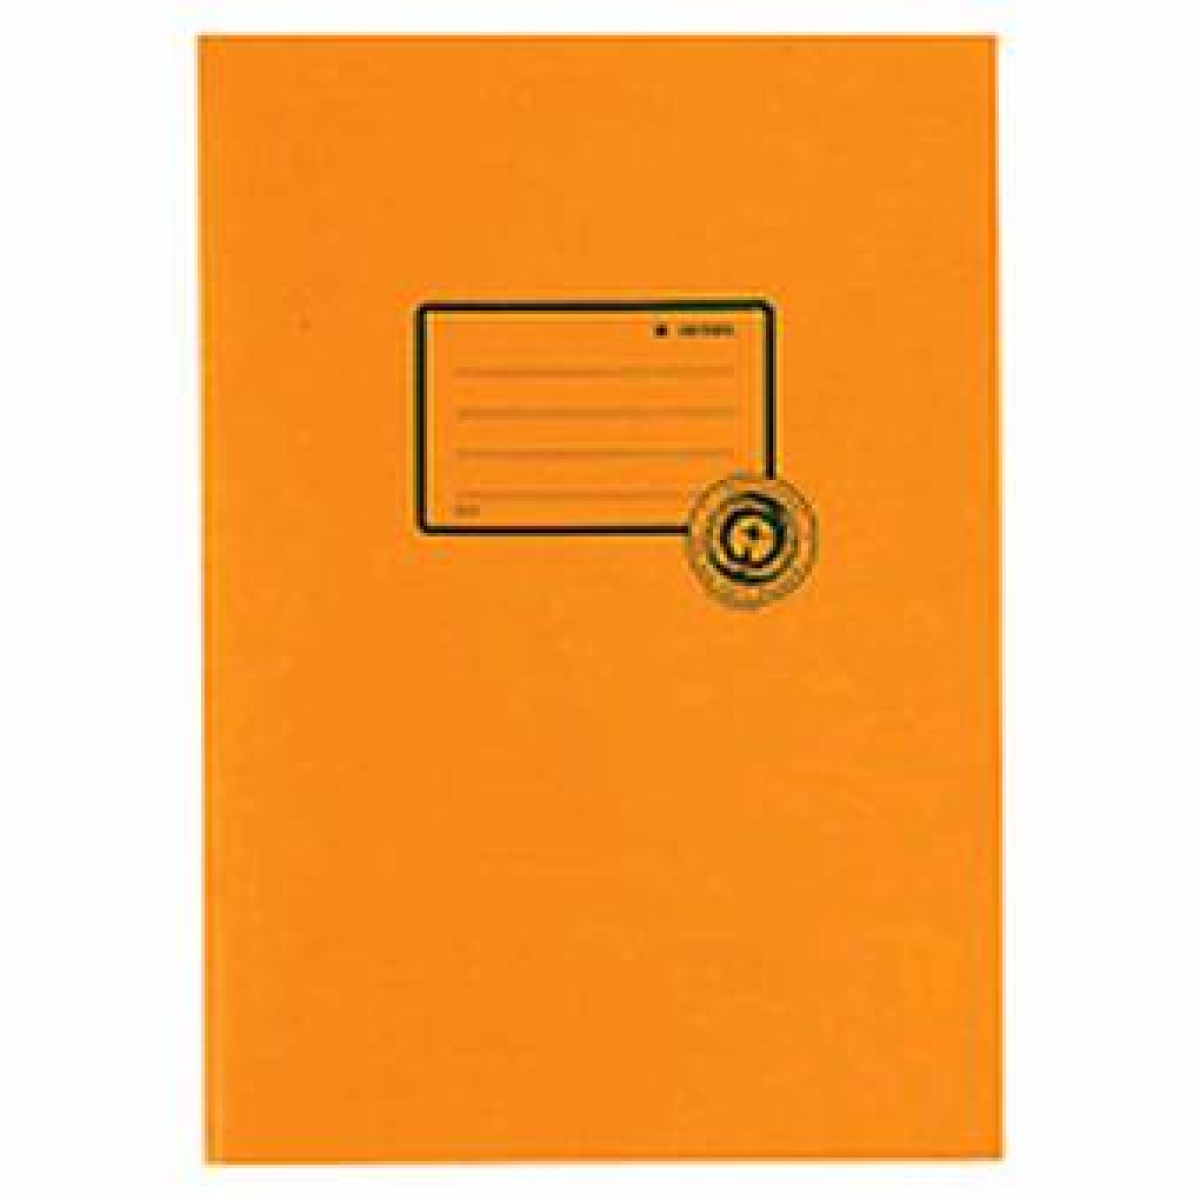 HermaBook cover recycling A5 orange 5504-Price for 10 pcs.Article-No: 4008705055048